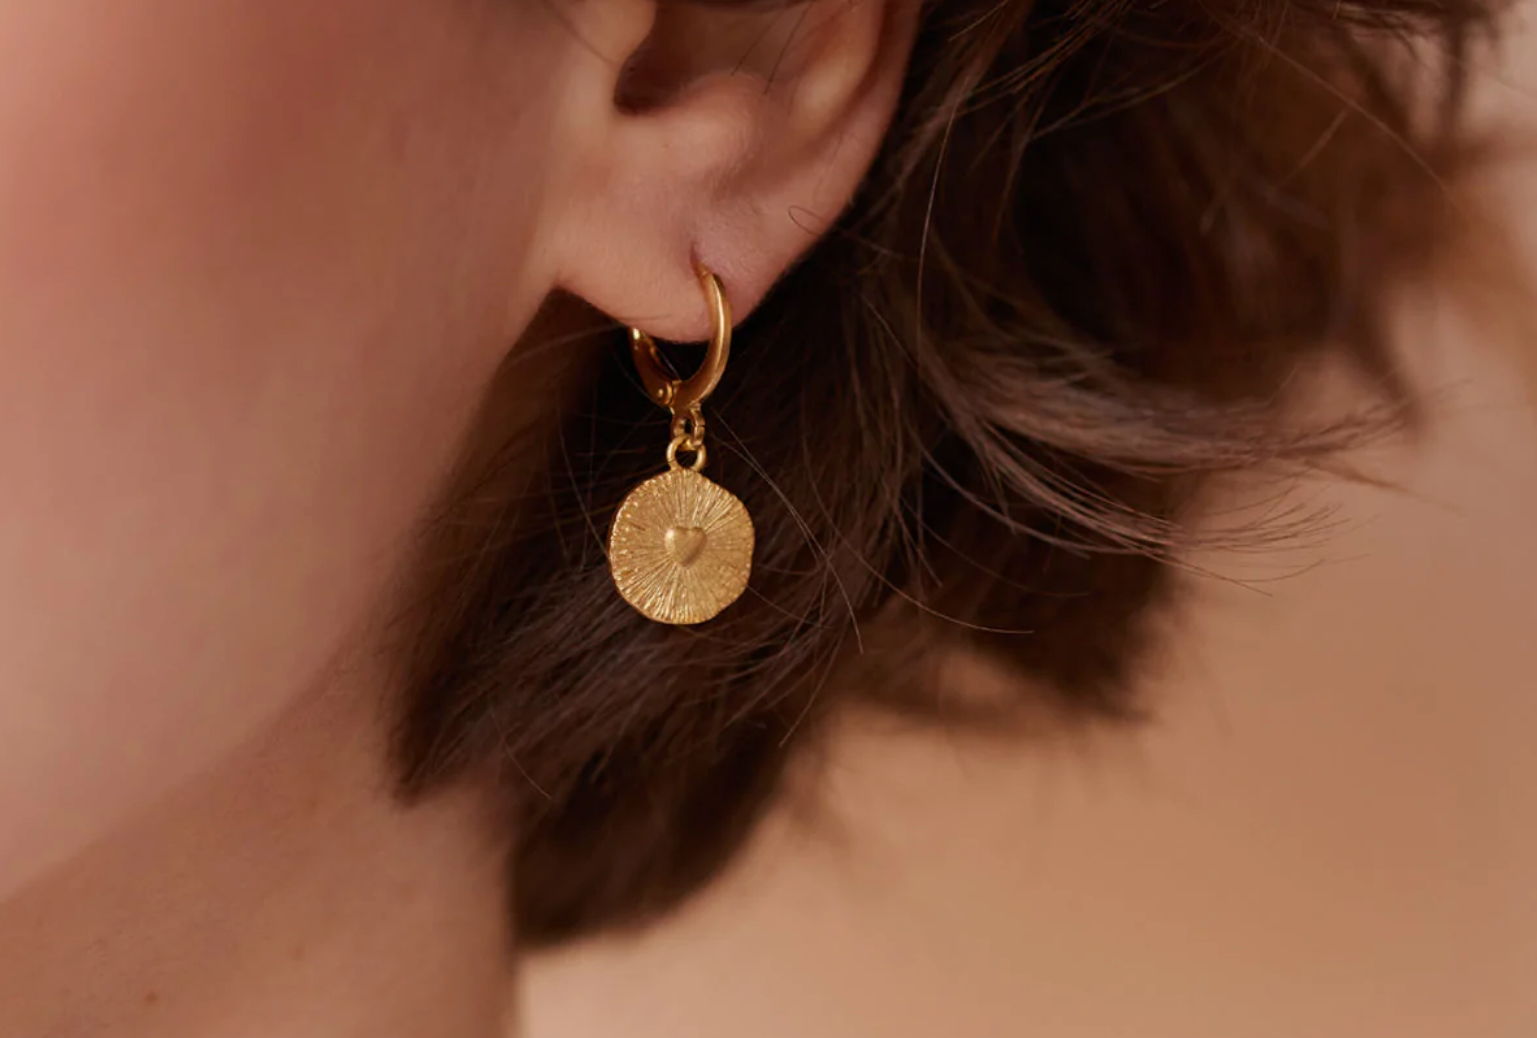 Are Gold-Plated Earrings Good for Sensitive Ears?